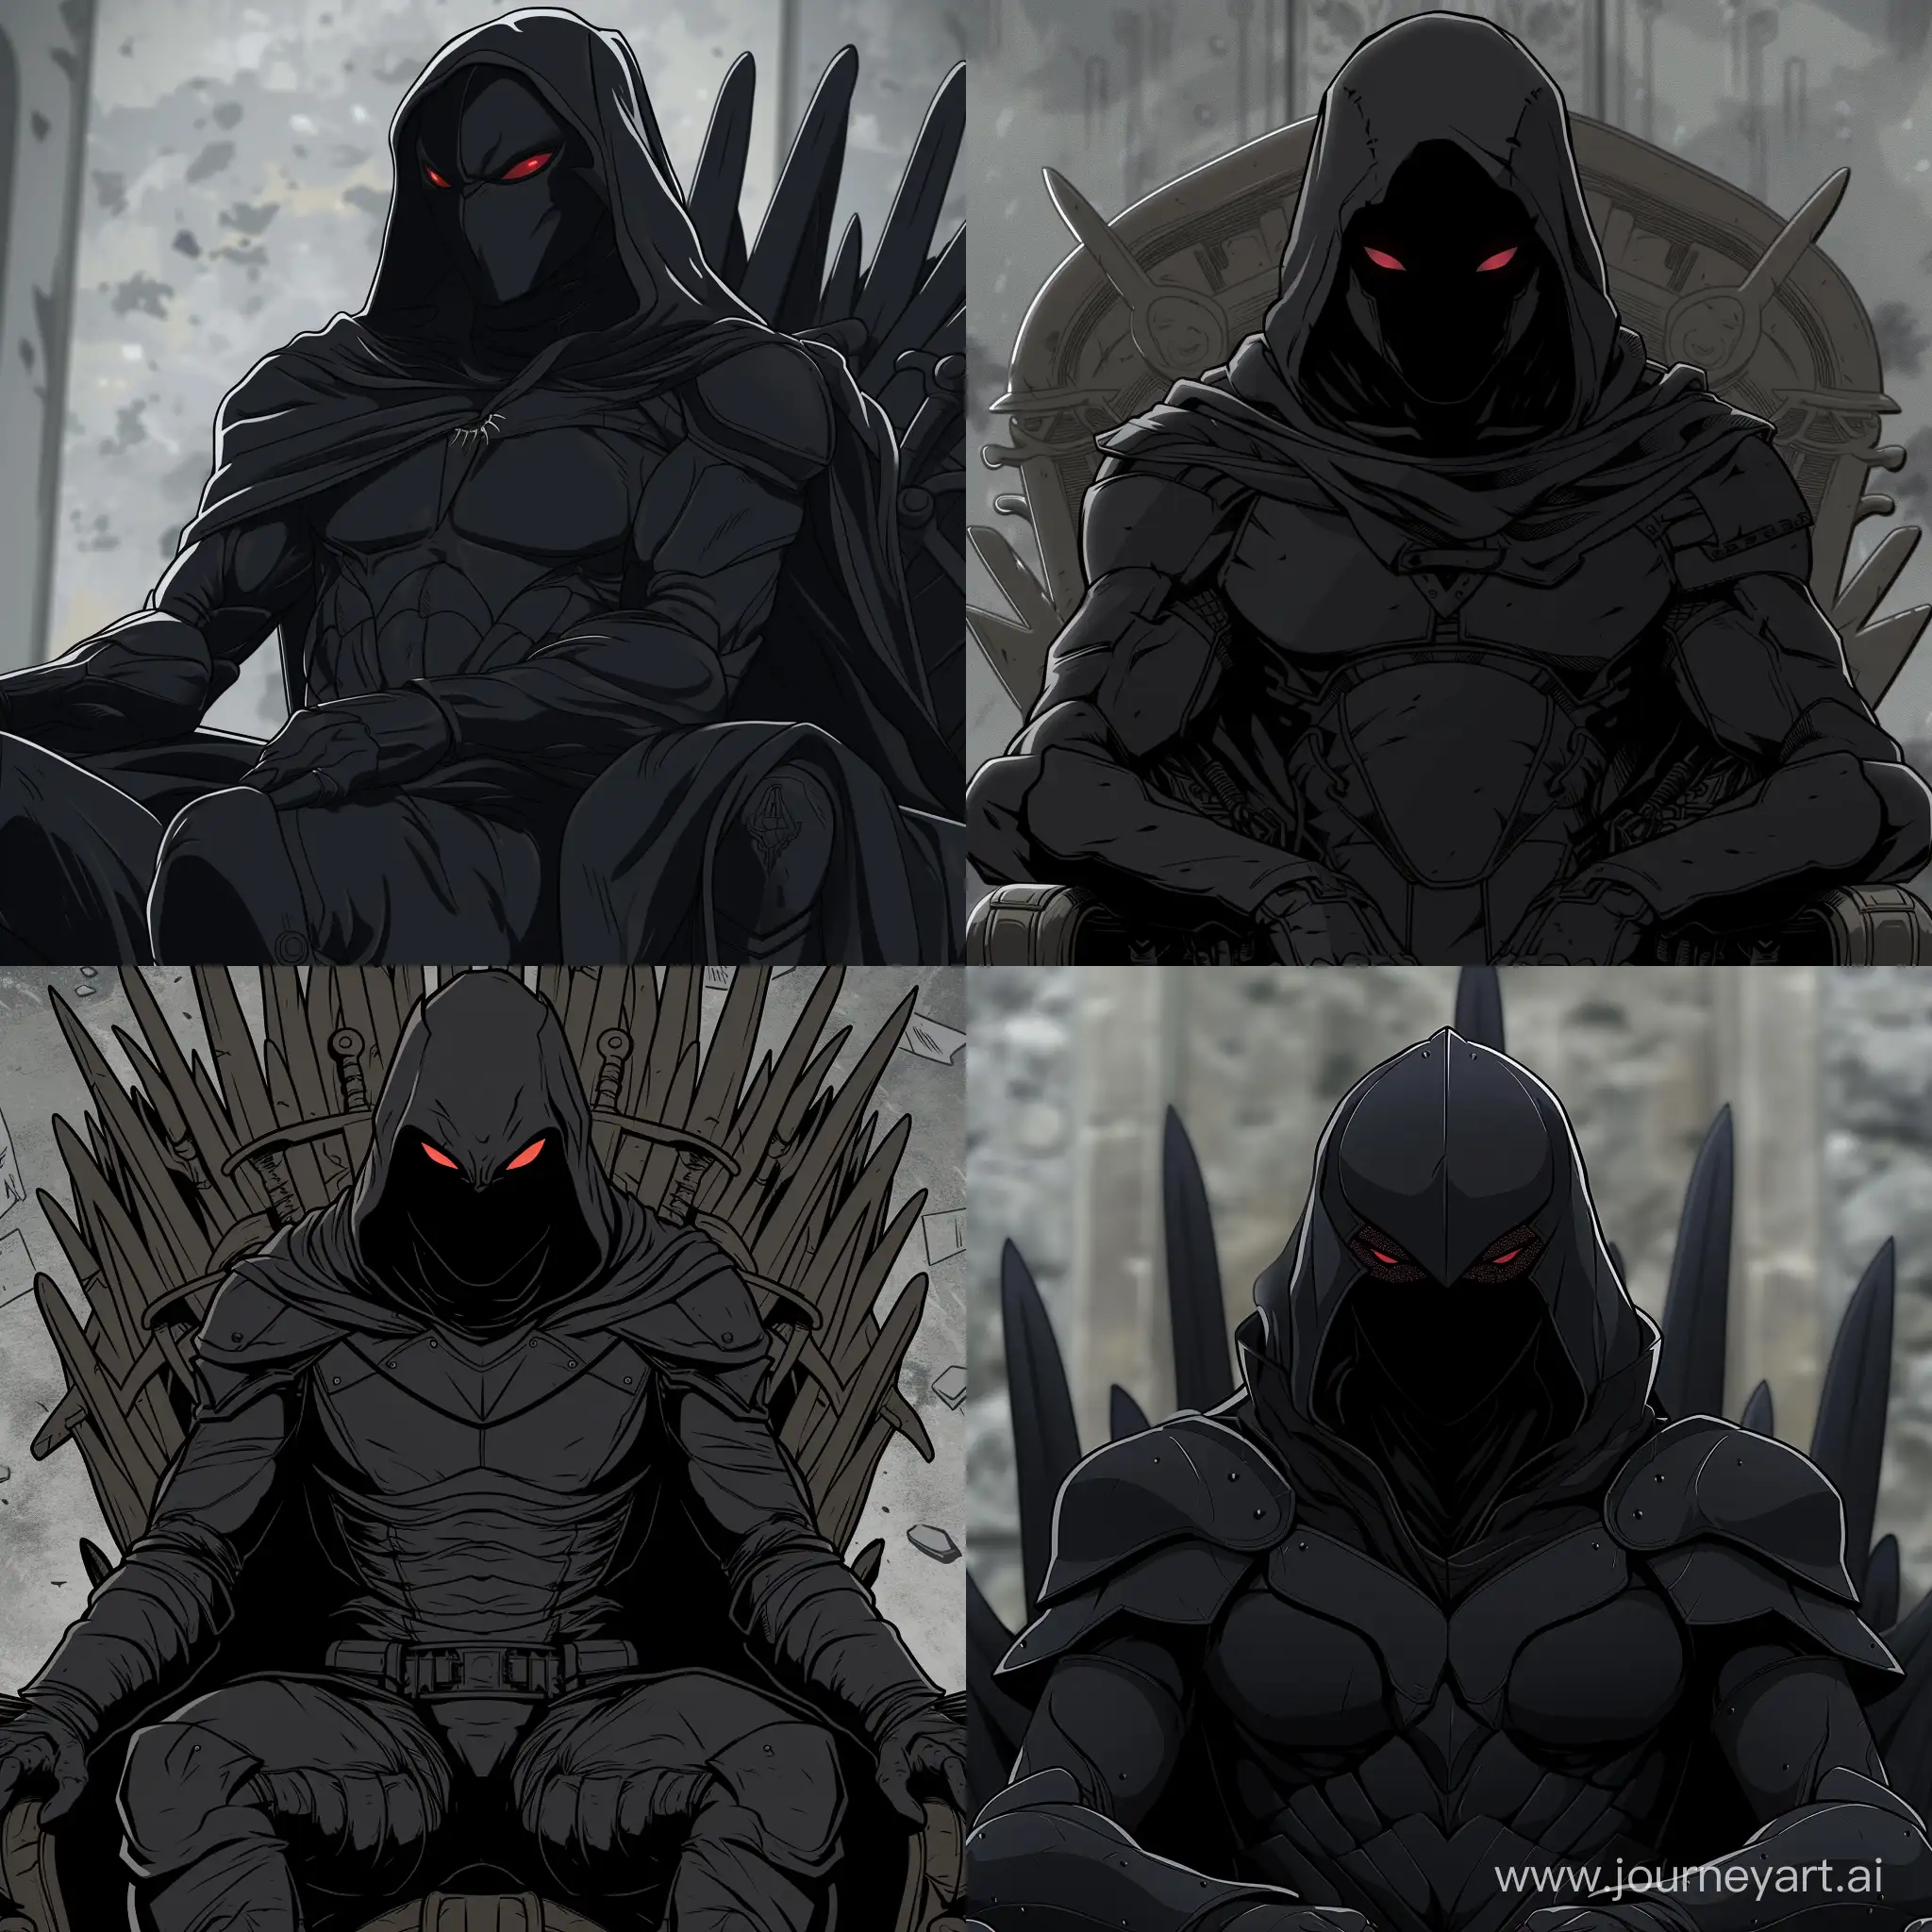 Sinister-Demon-King-on-Ebony-Throne-in-Comic-Style